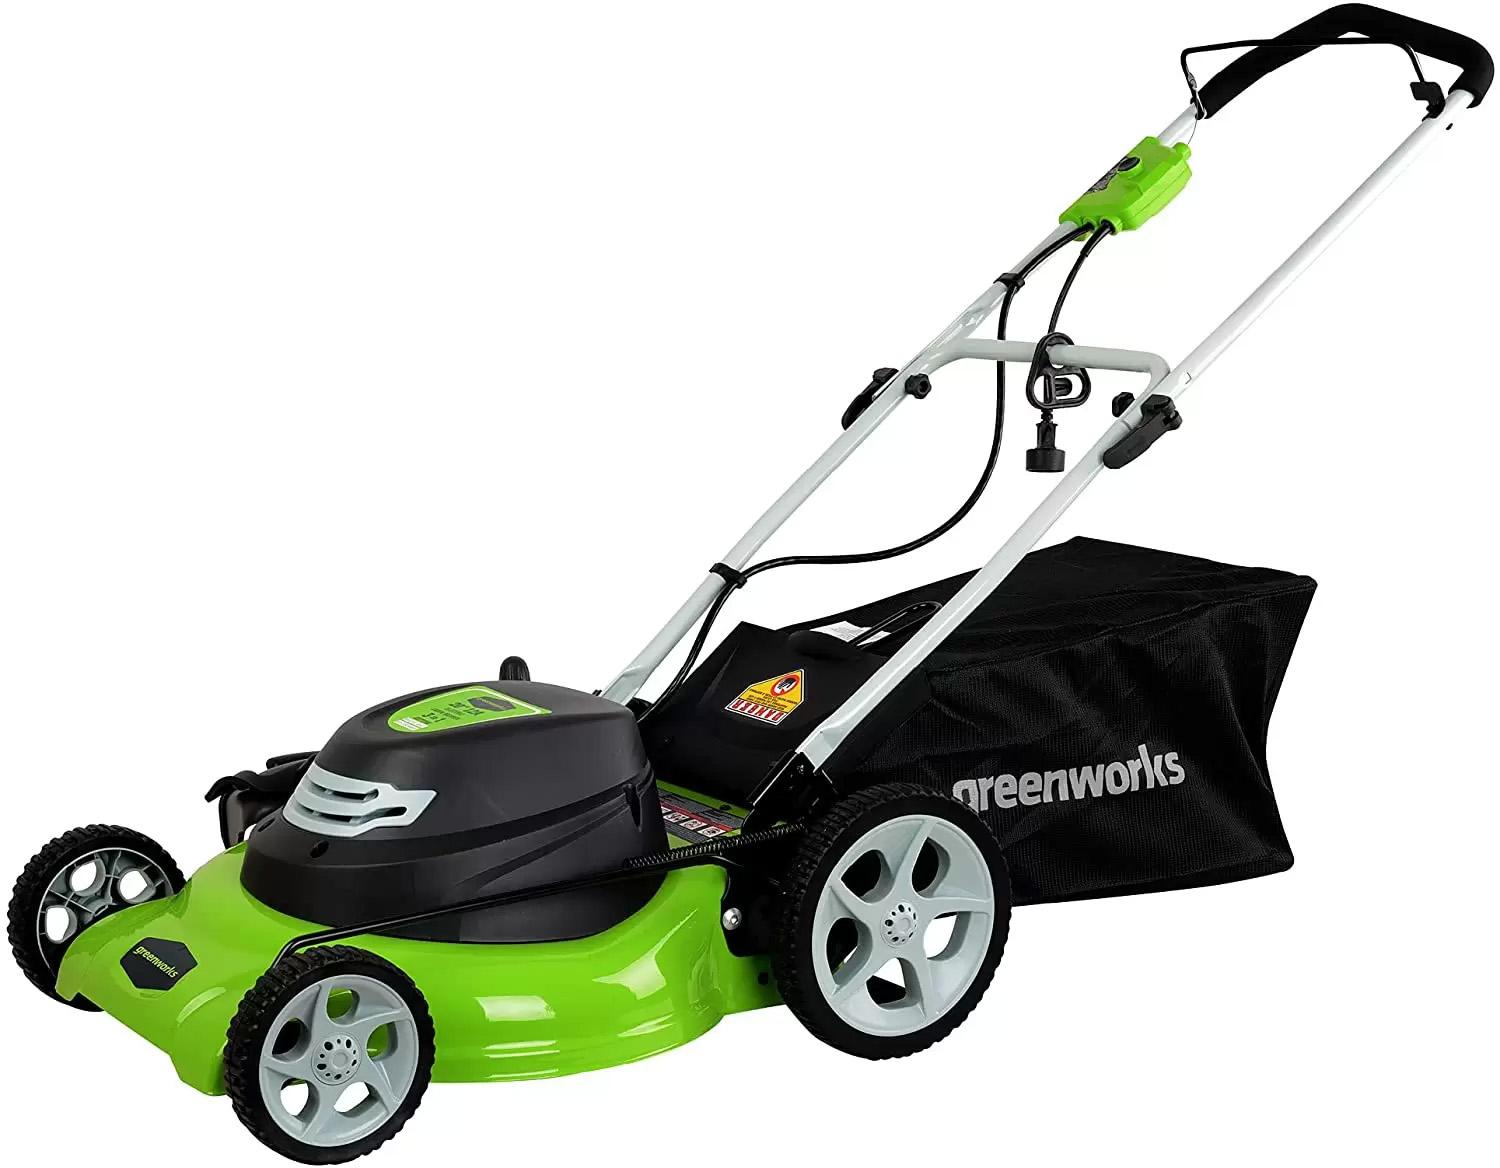 Greenworks 12A 20in 3-in-1 Electric Corded Lawn Mower for $89.99 Shipped